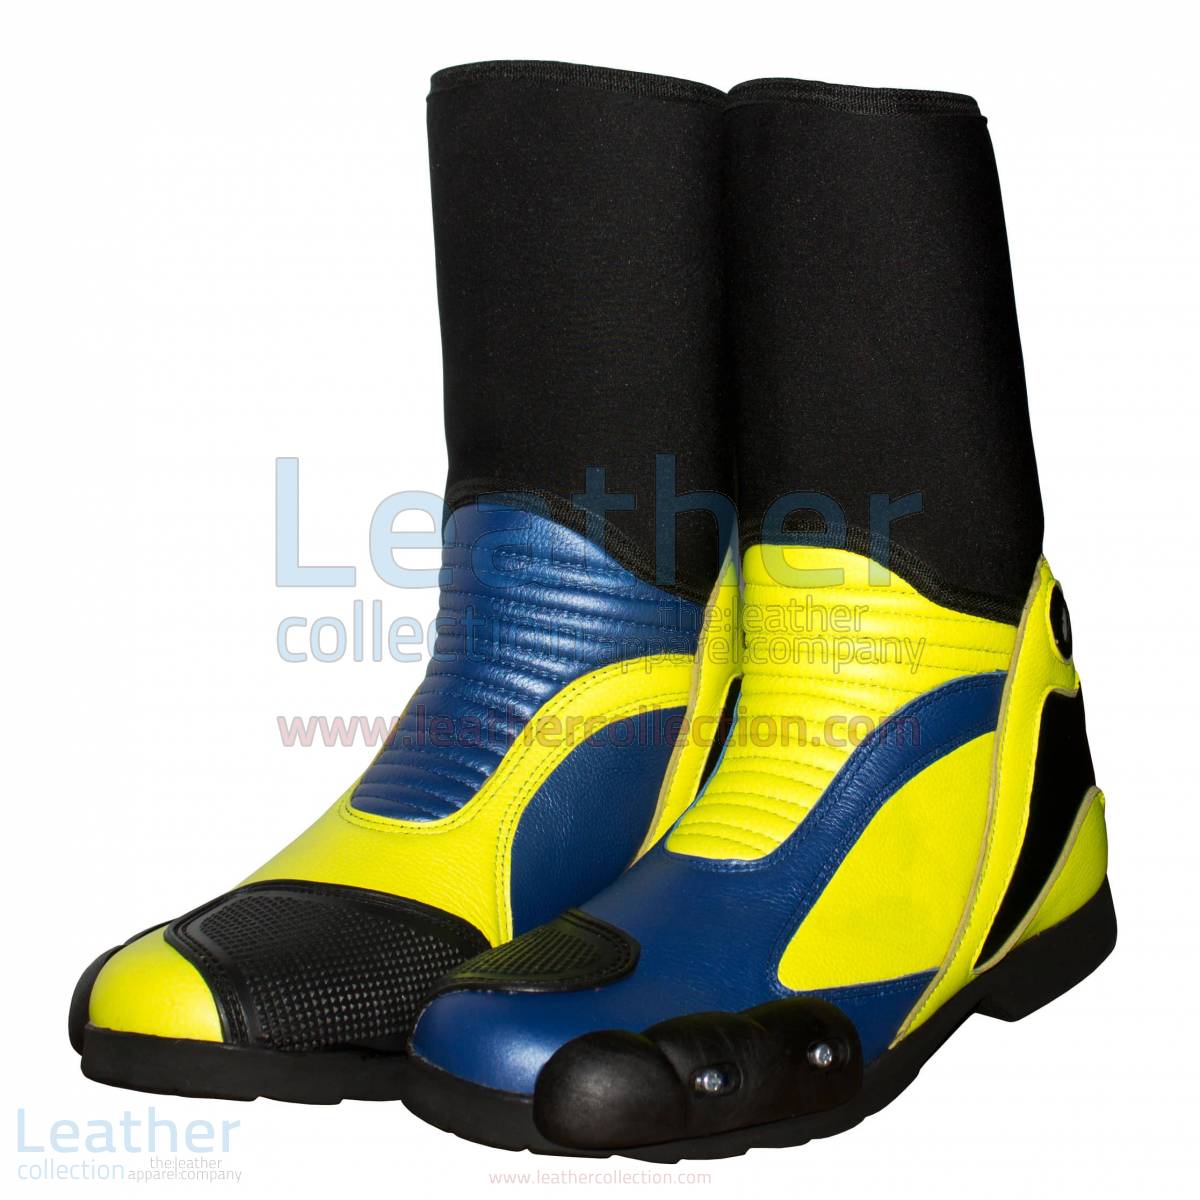 valentino rossi 2014 motorcycle race boots